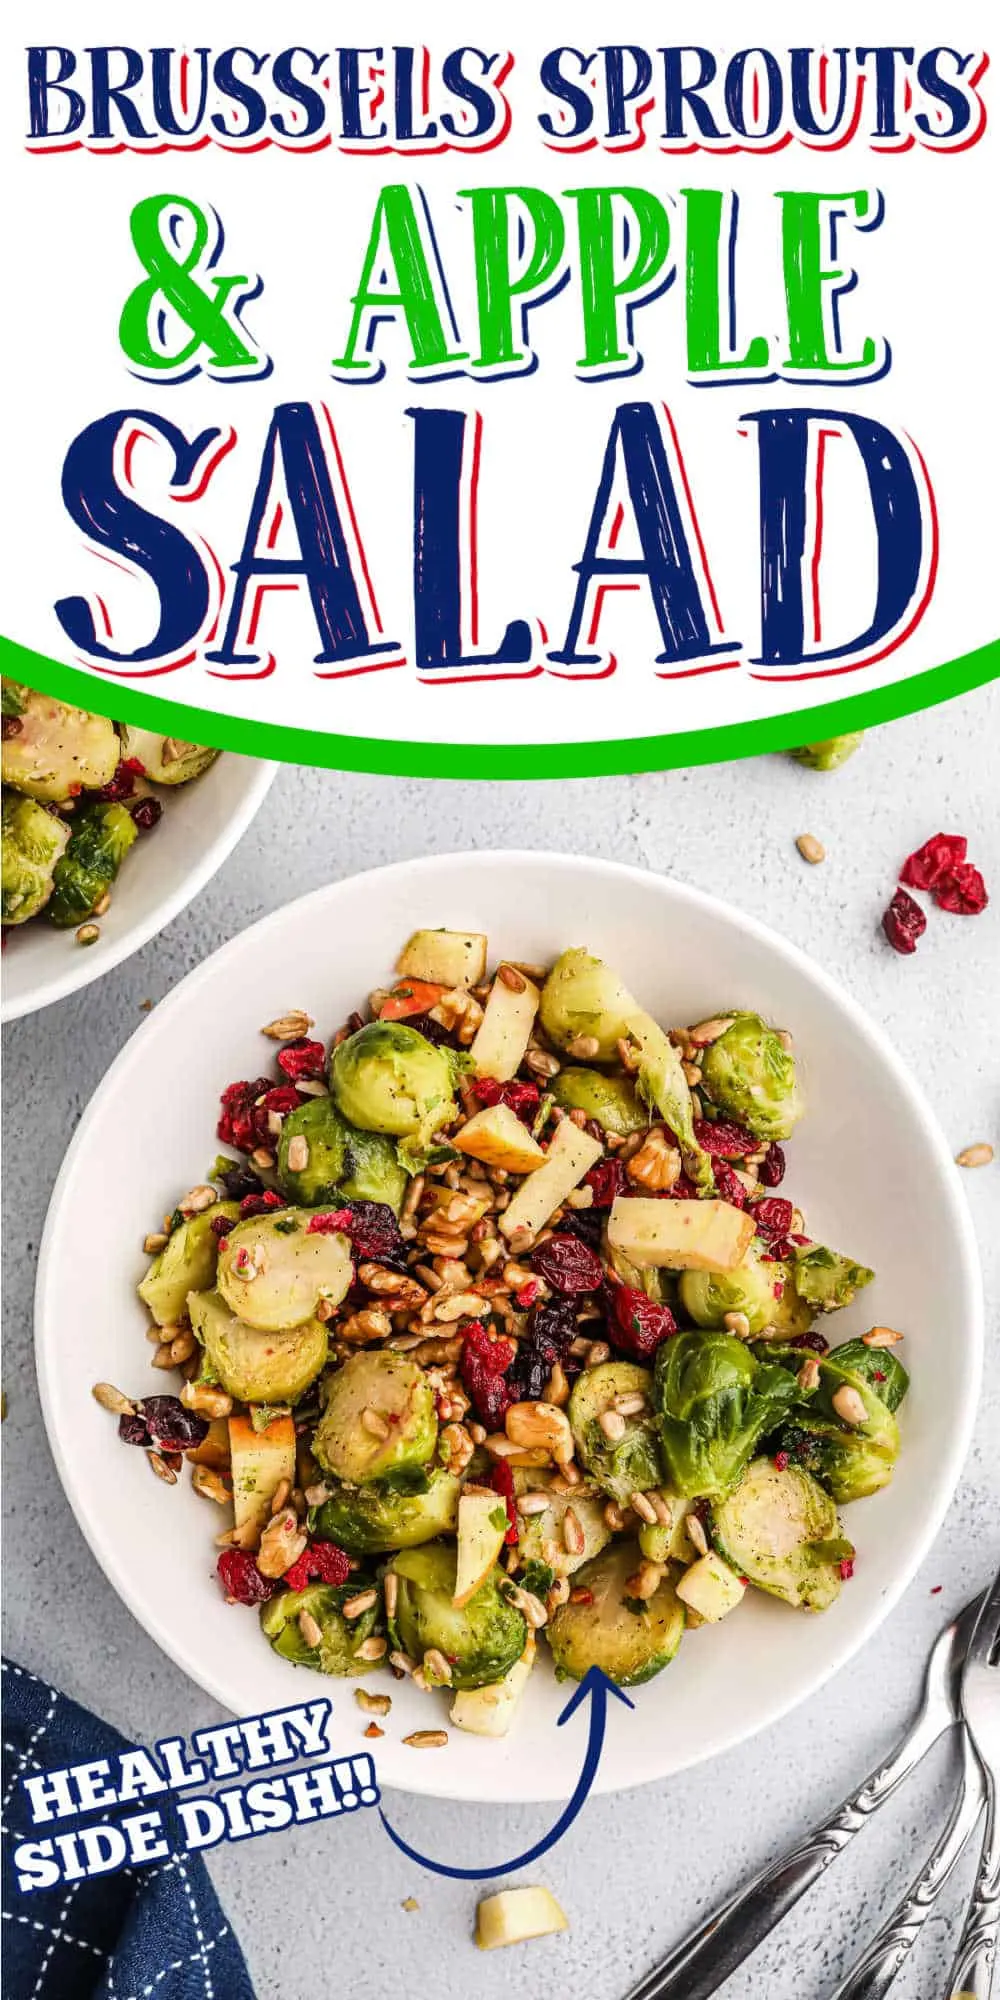 salad with text "brussels sprouts & apple salad"